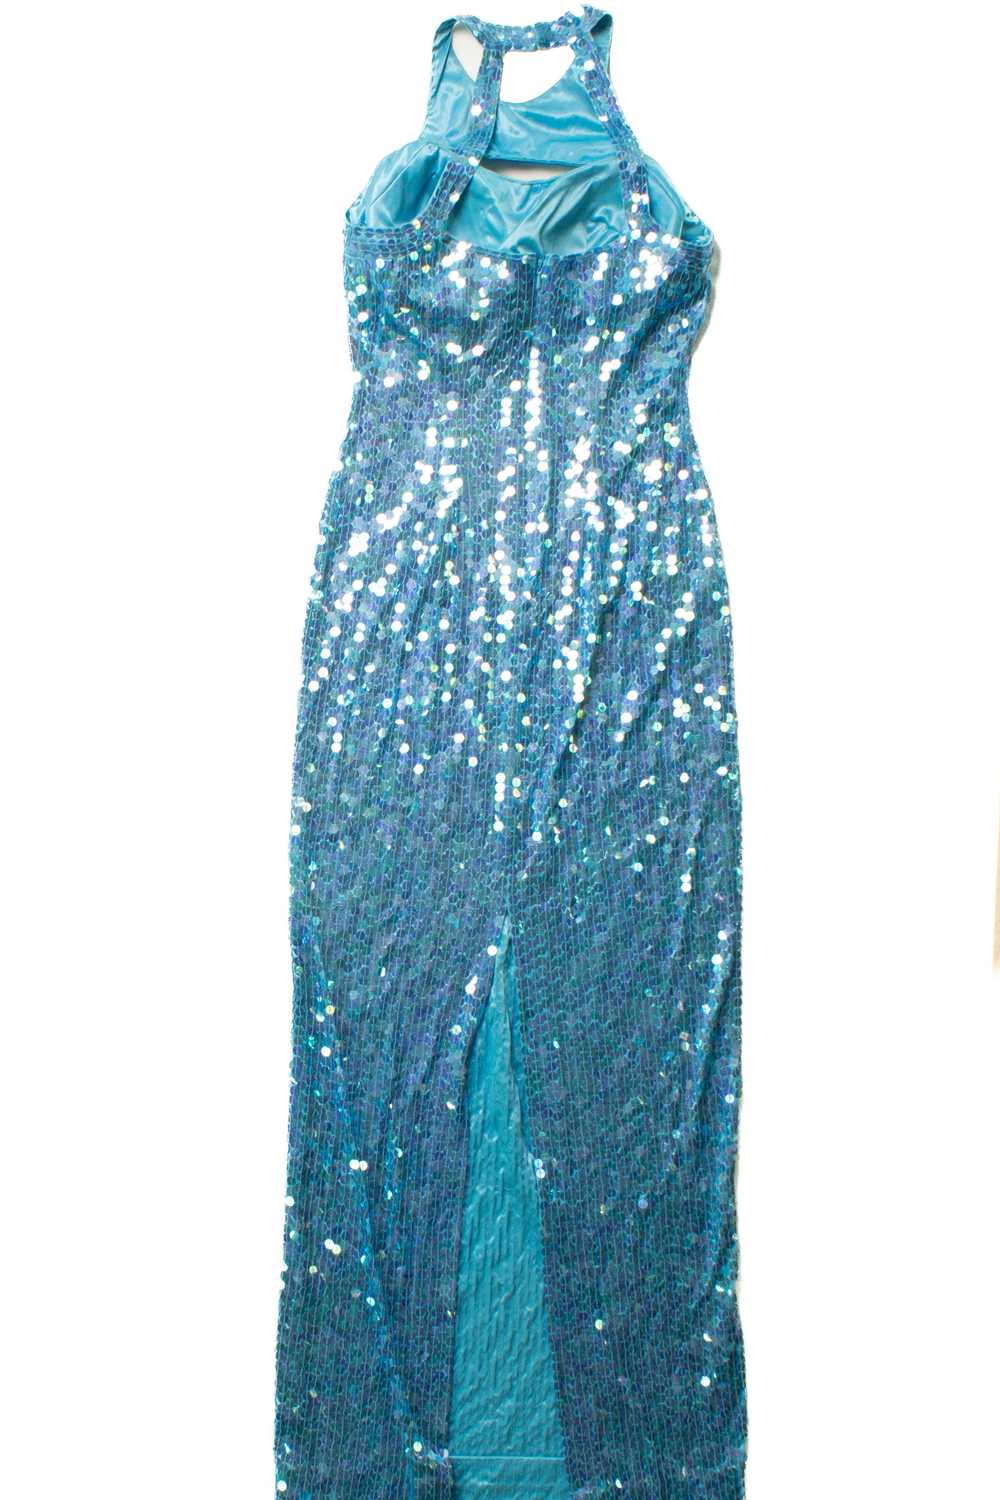 Vintage Adrianna Papell Blue Sequin Dress - image 7